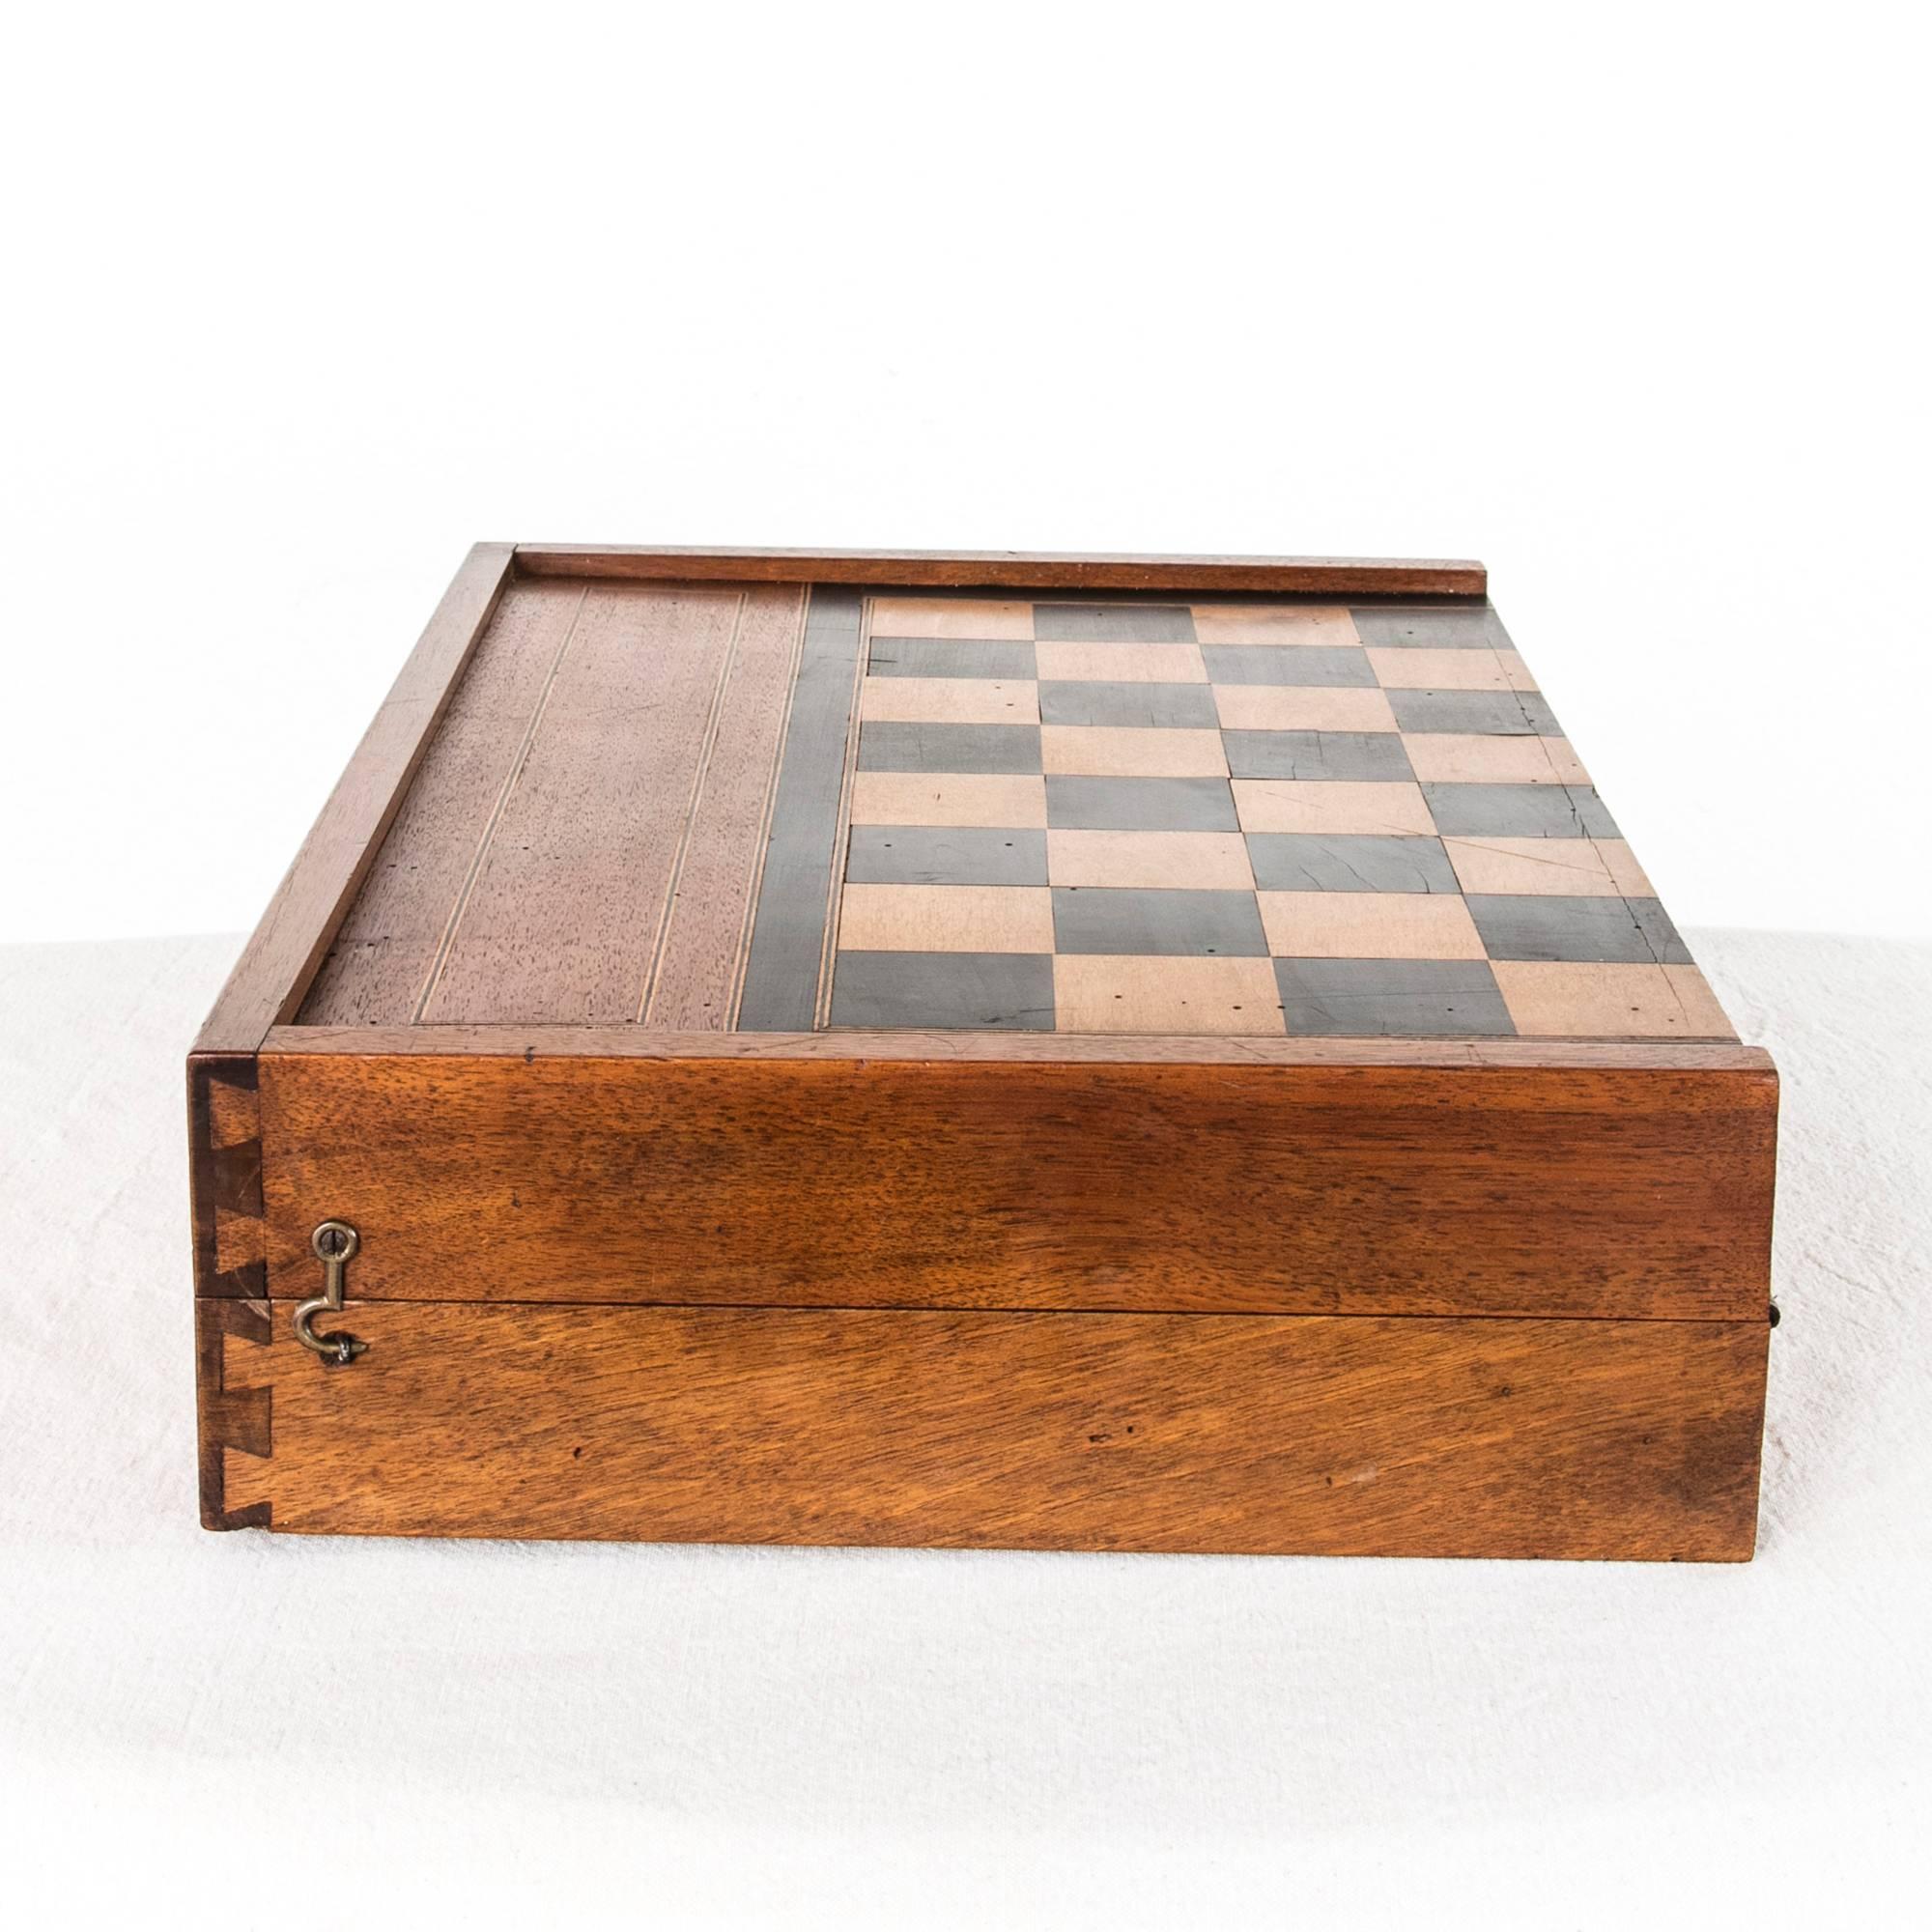 Early 20th Century Antique French Parquetry Game Board Box for Checkers, Chess, or Backgammon